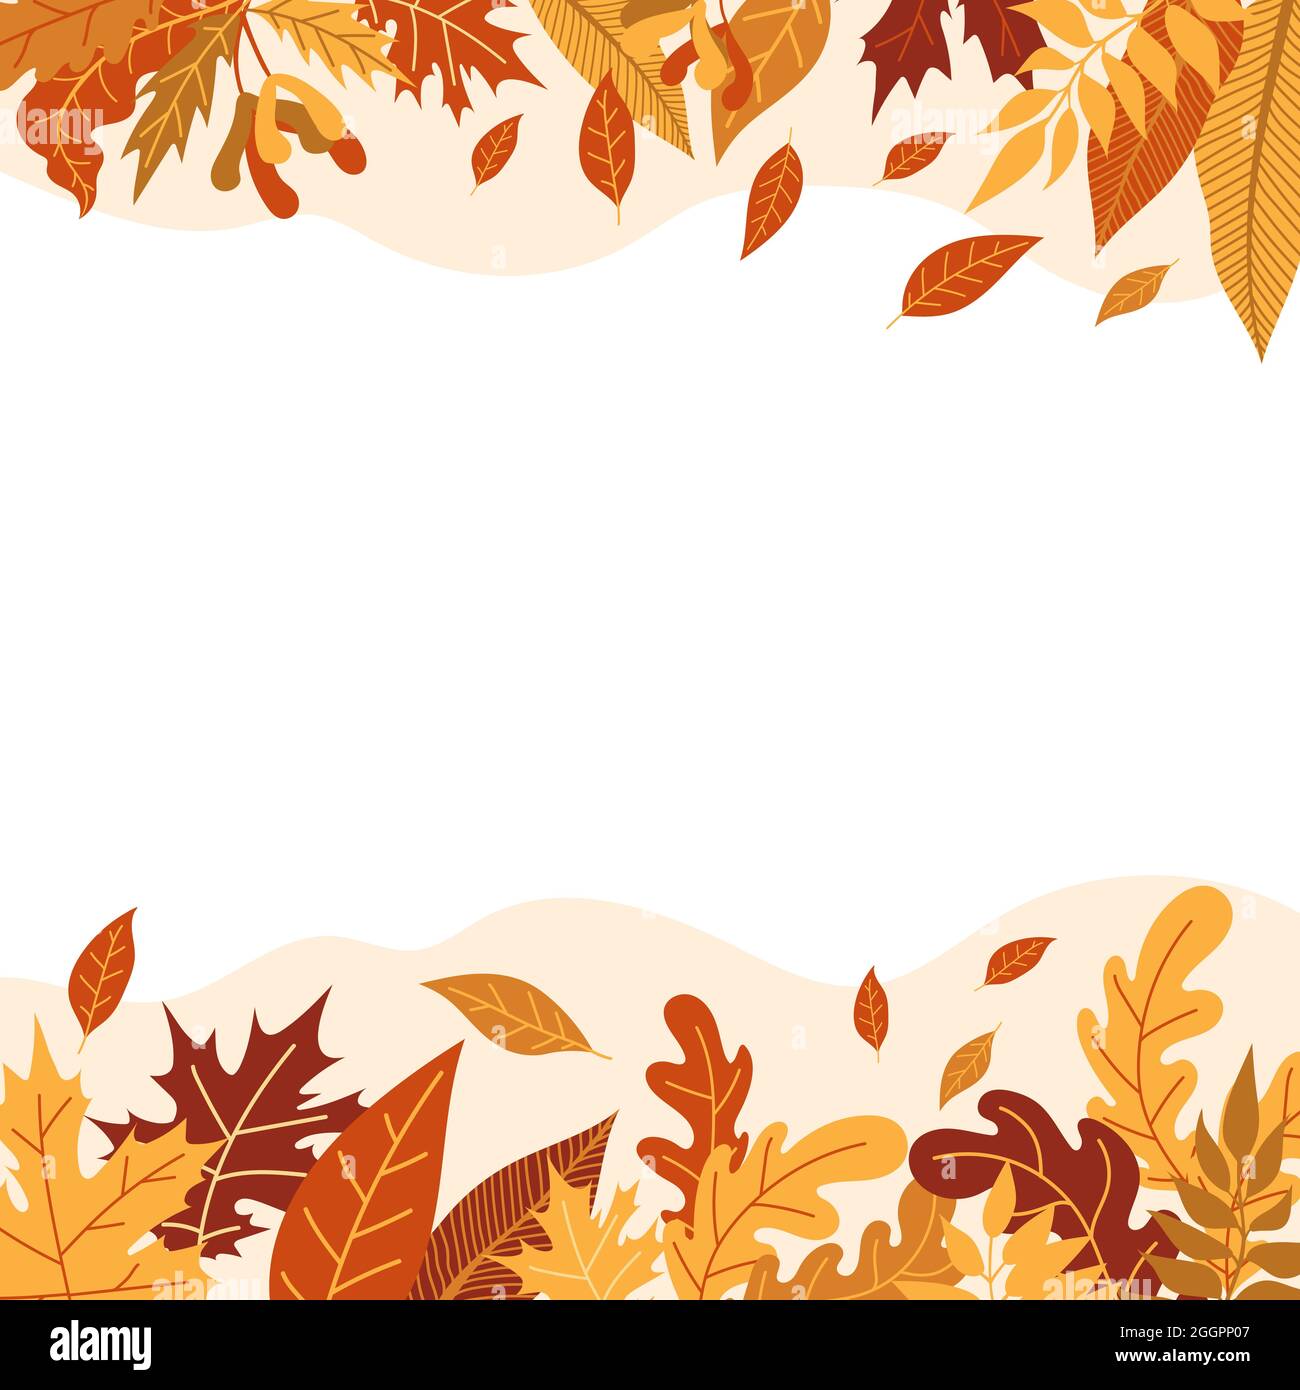 Orange autumn leaves vector illustration. Autumn Halloween frame with leaves, graphic icon or print isolated on white background Stock Vector